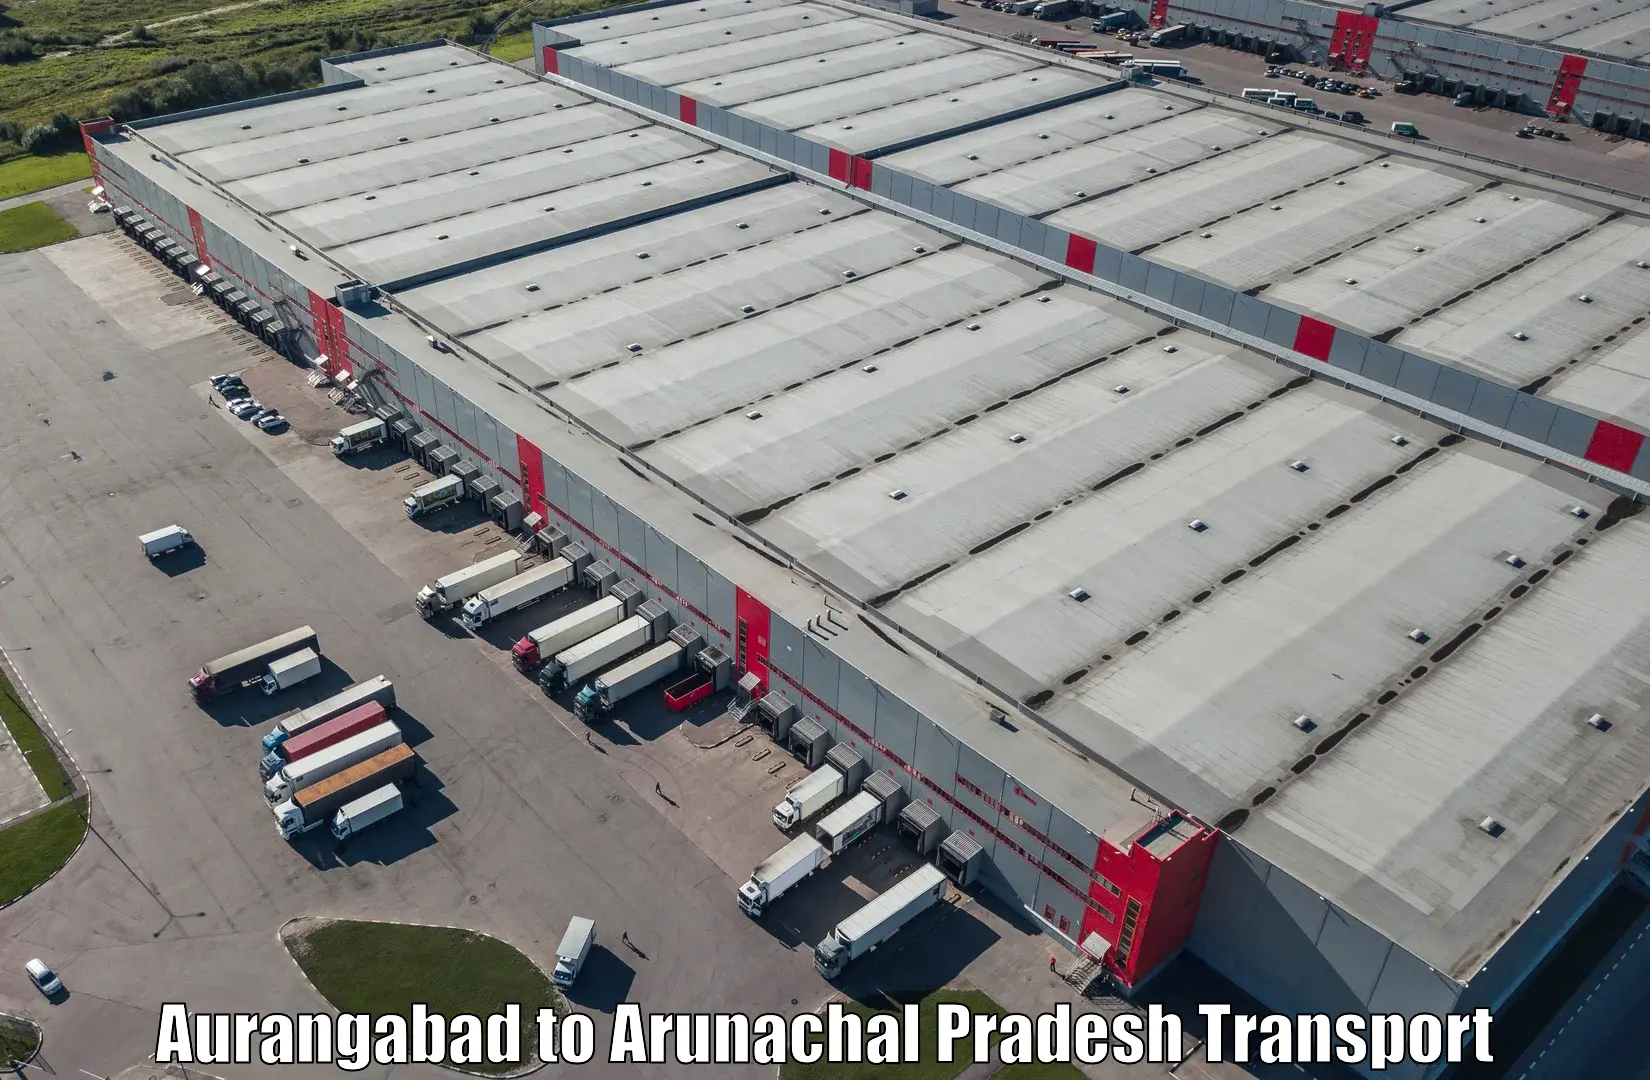 Air freight transport services in Aurangabad to Sagalee